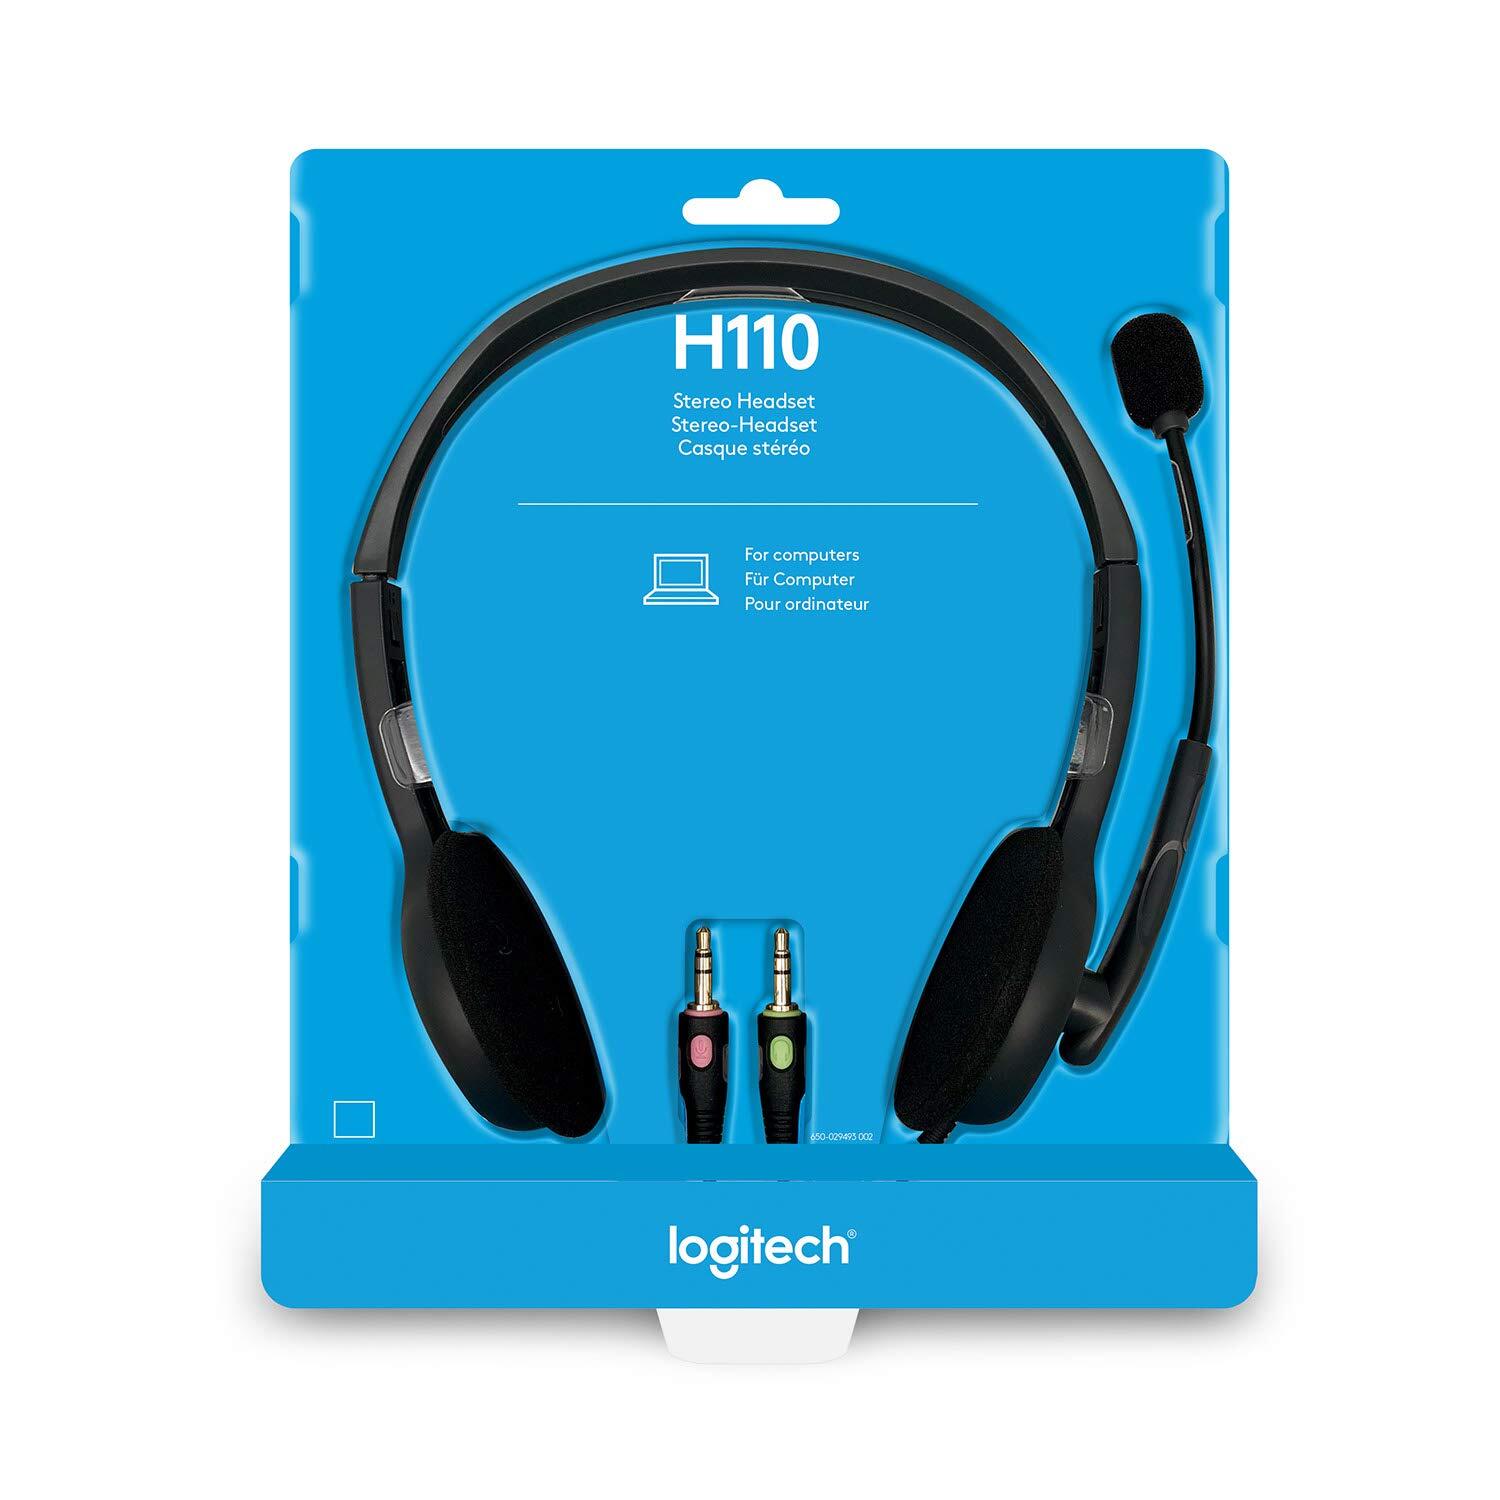 Logitech H110 Wired Stereo Headphone with 3.5mm Dual Audio Jack and Rotating Microphone